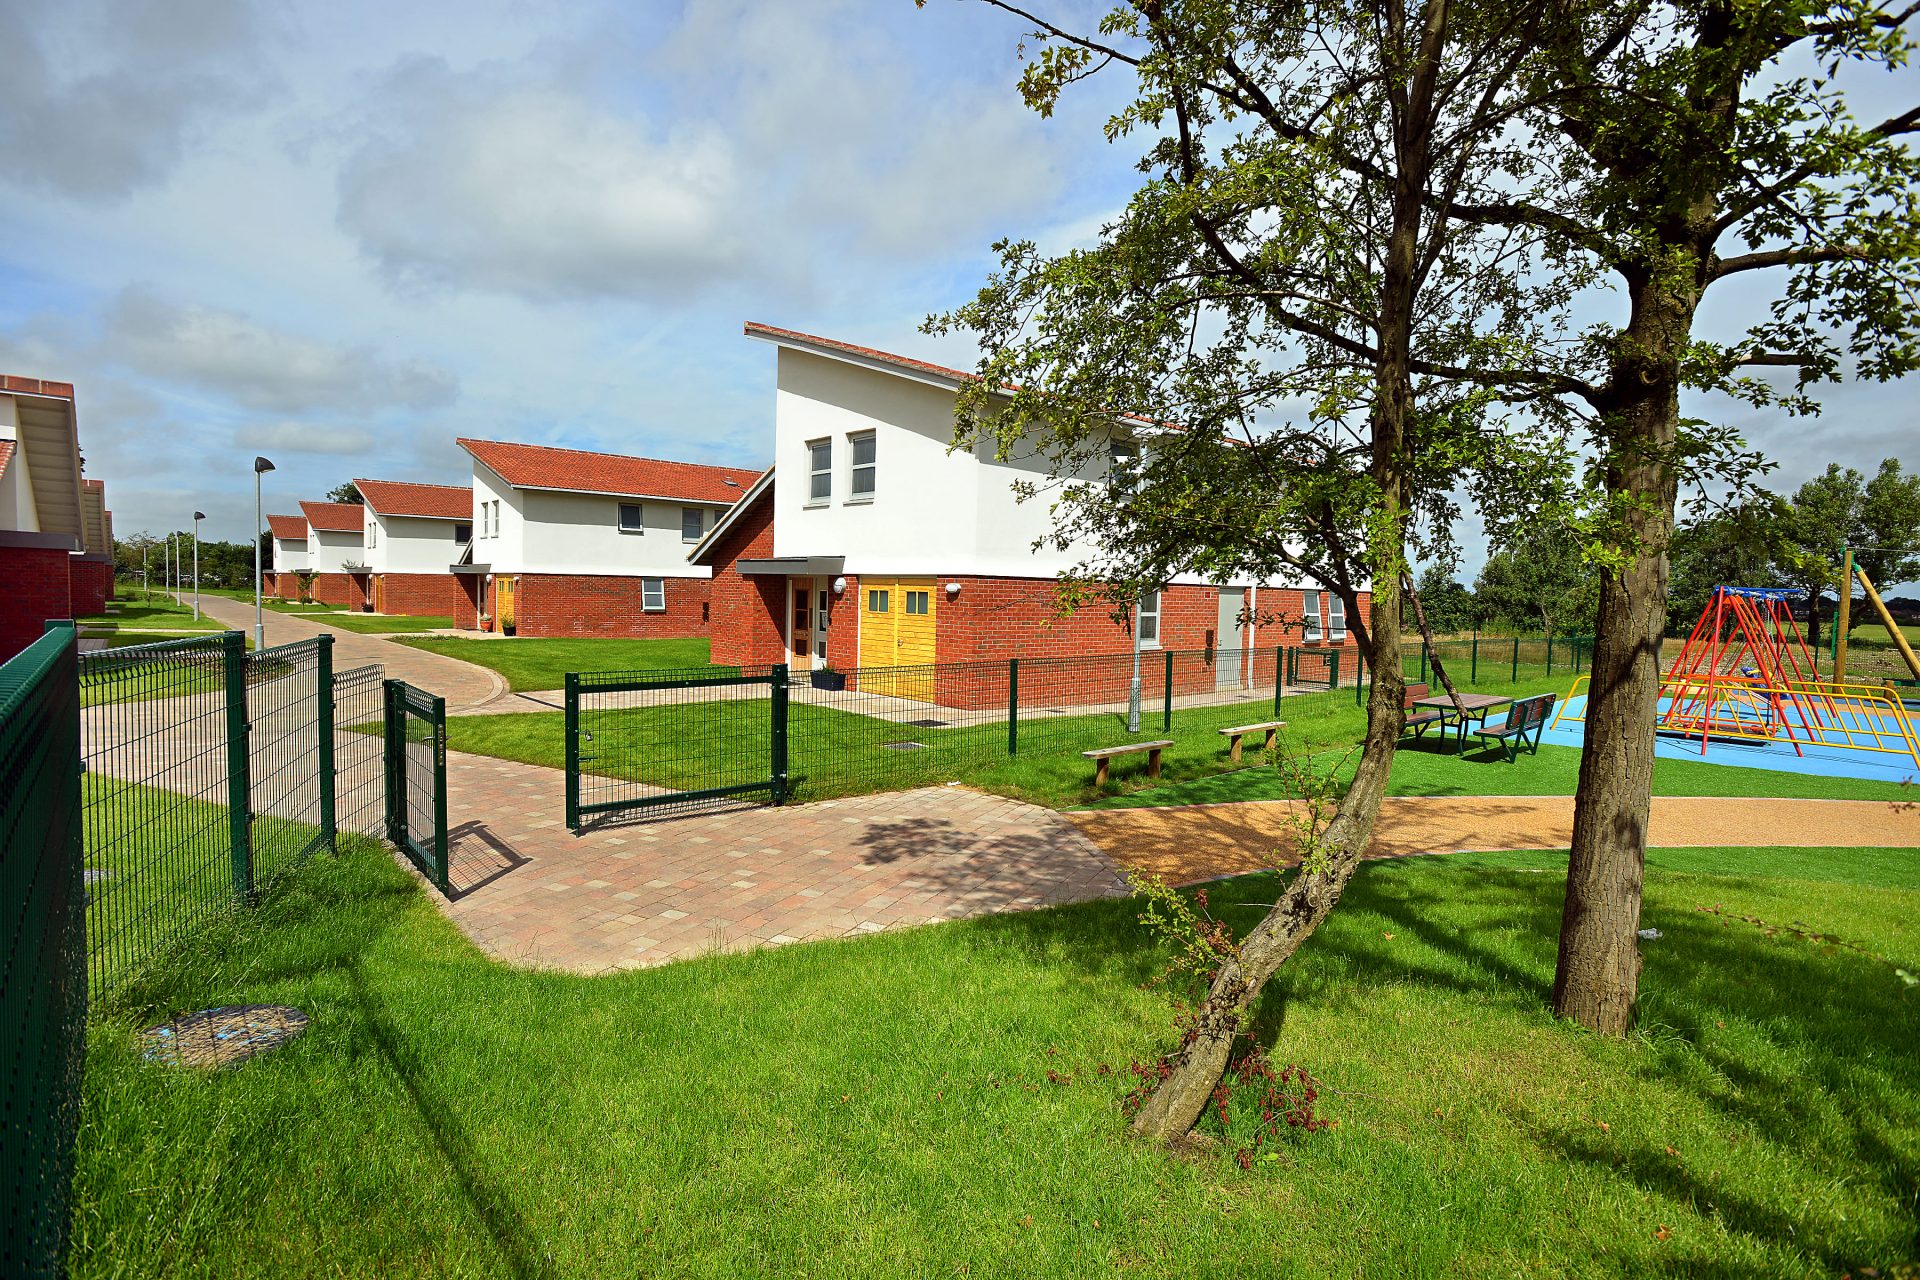 seashell residential care facilities with trees and greenery